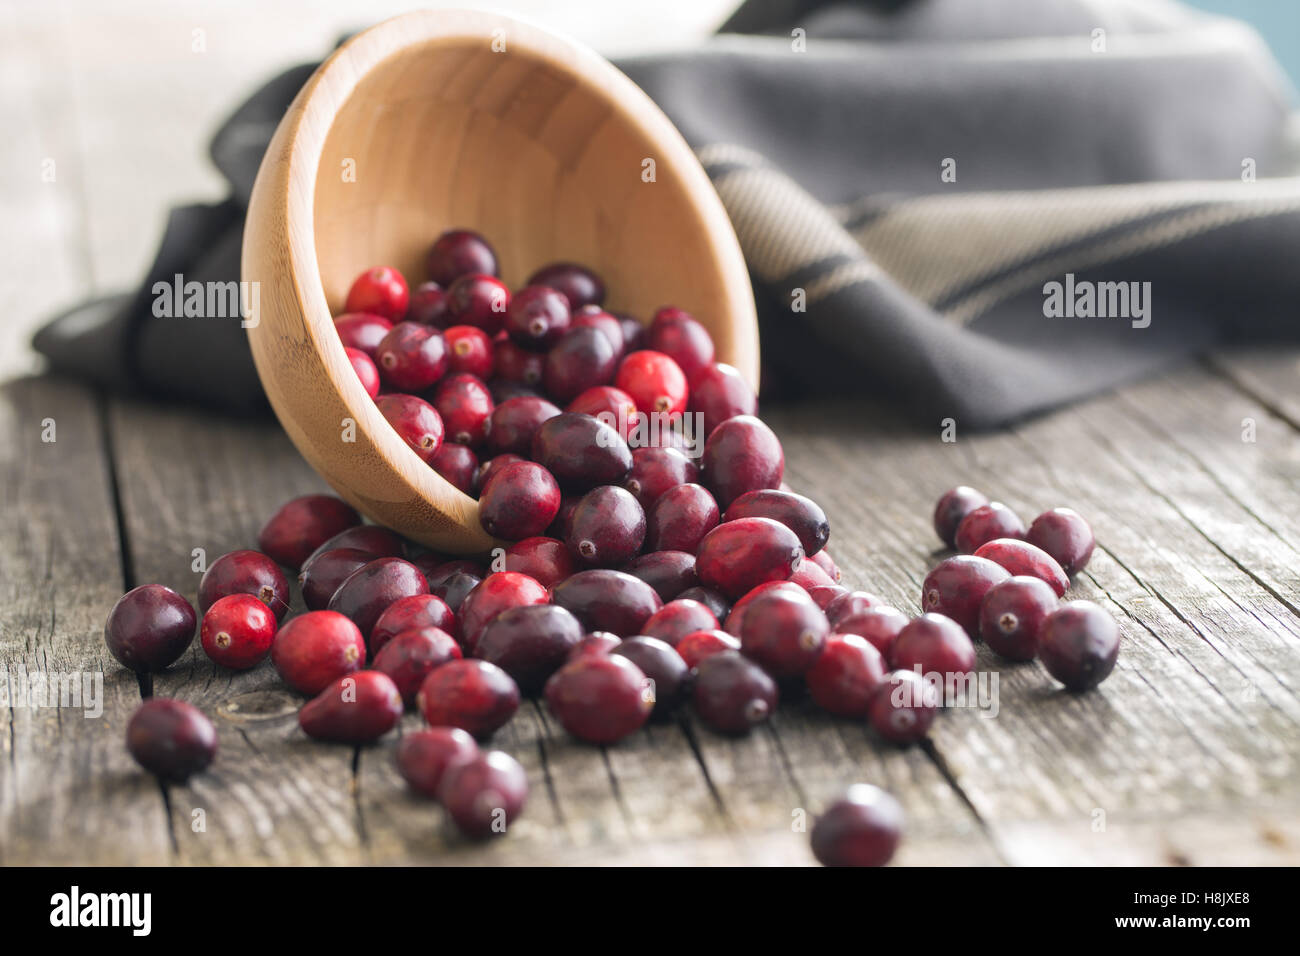 The tasty american cranberries in bowl on old wooden table. Stock Photo